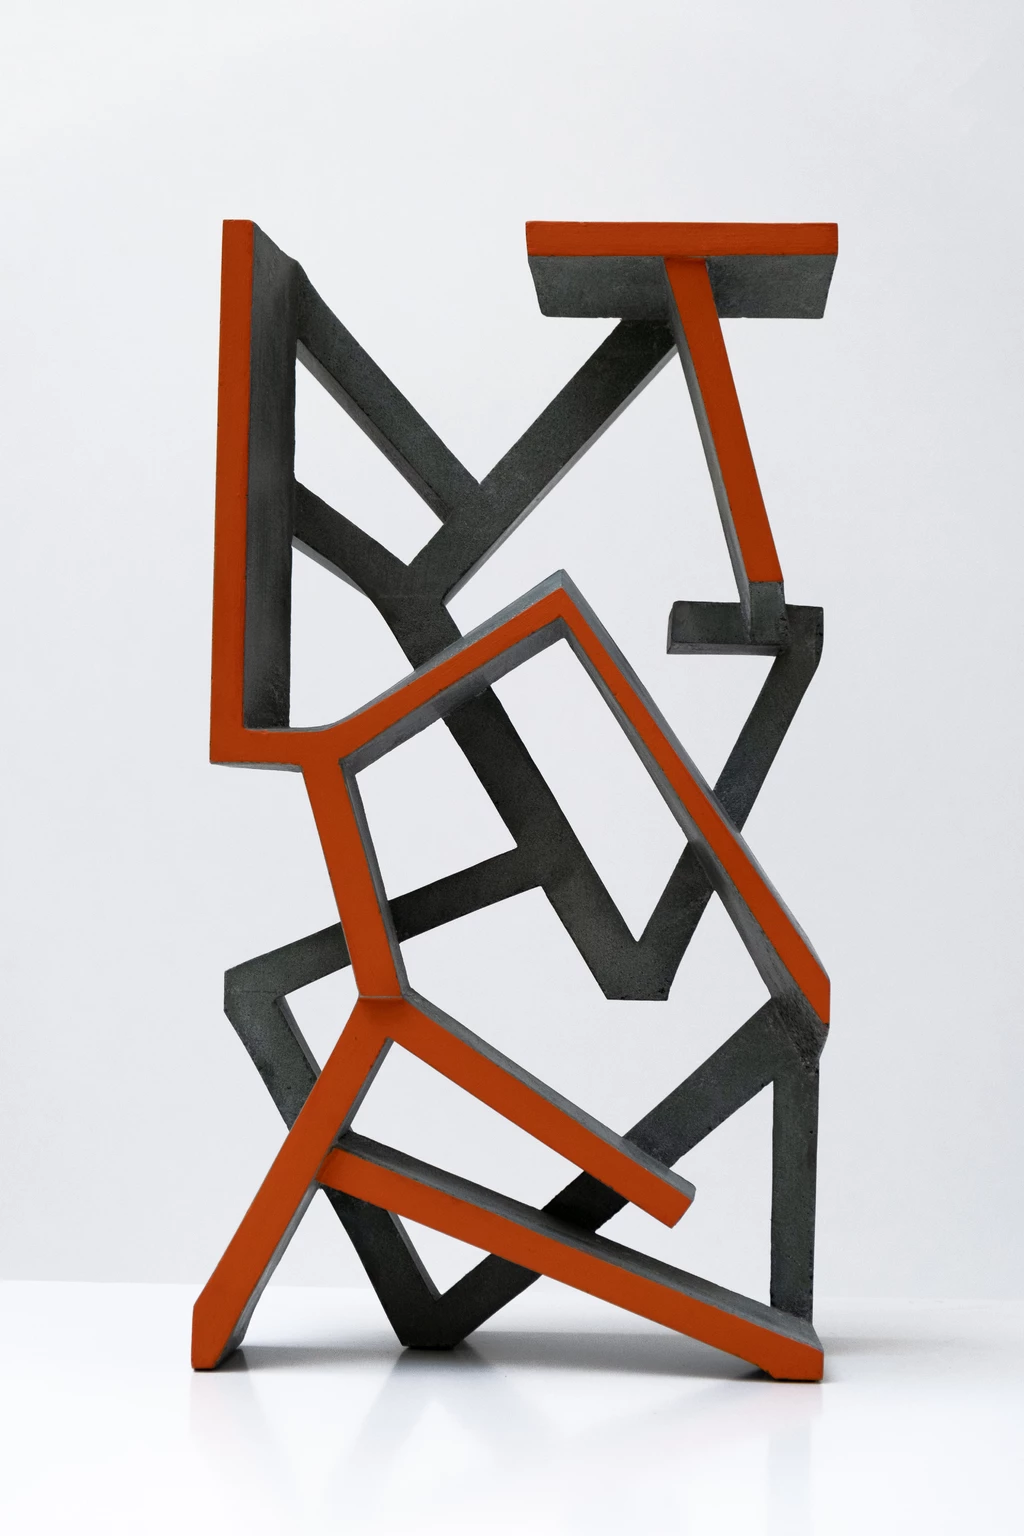 Biner 8., 2020 - colored and painted concrete, 55 x 30 x 15 cm